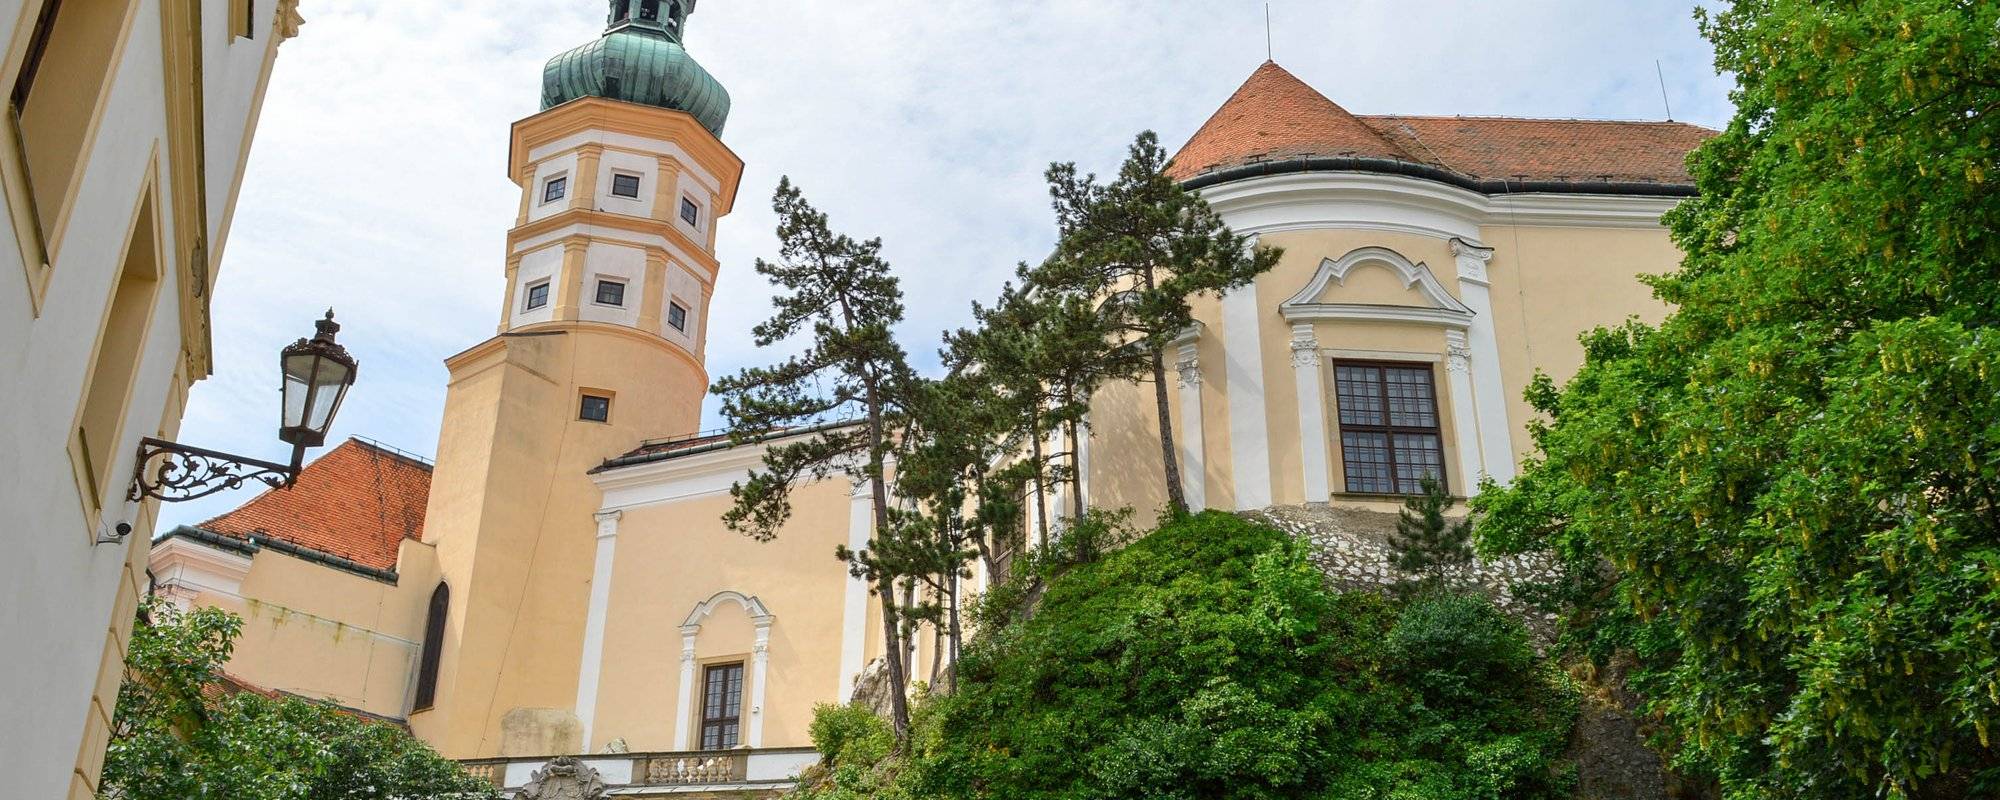 Mikulov - Picturesque Town in South Moravia